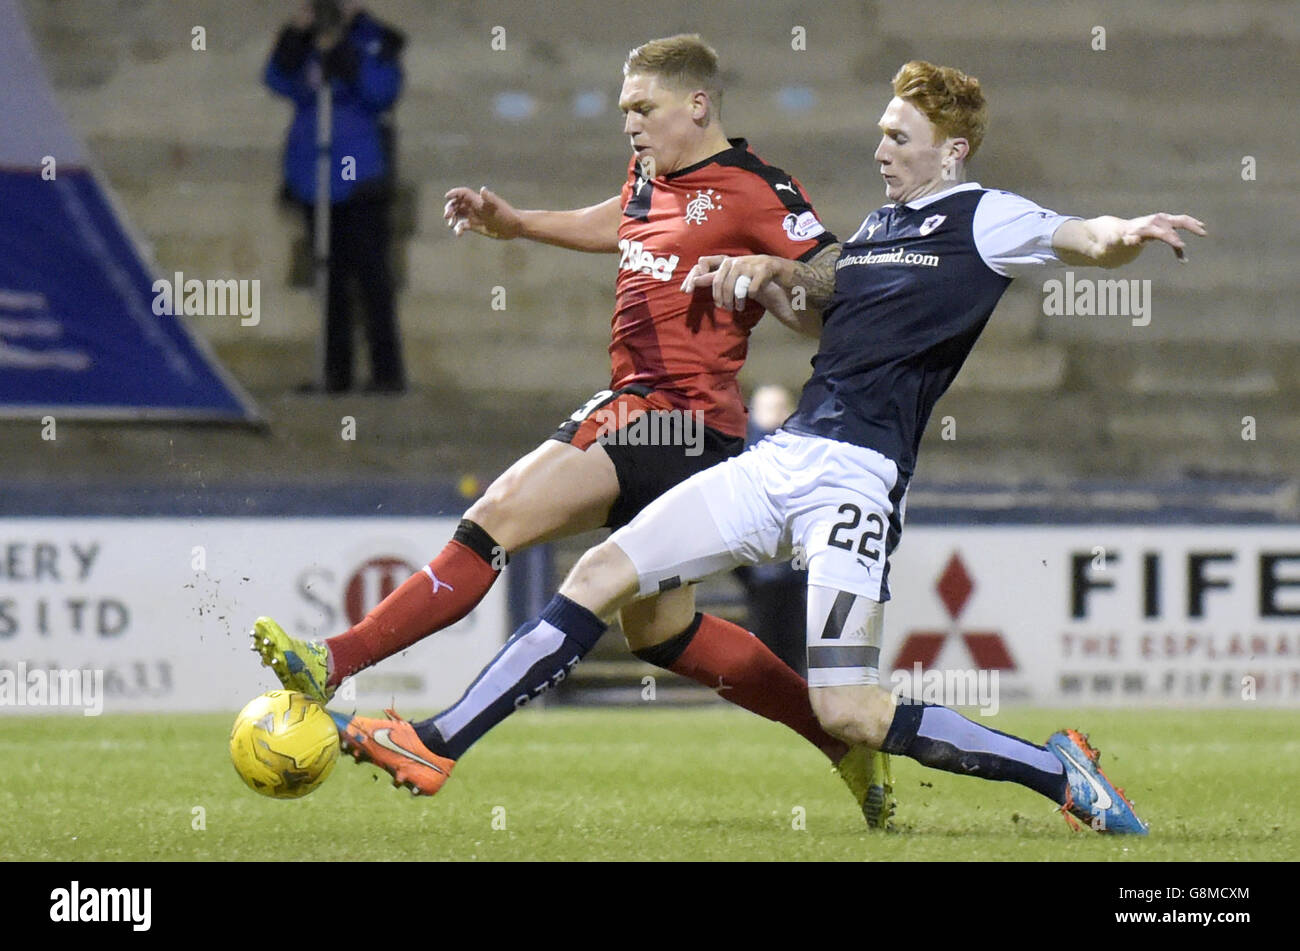 Raith Rovers' David Bates (right) and Rangers' Martyn Waghorn battle for the ball during the Ladbrokes Scottish Championship match at Stark's Park, Kirkcaldy. Stock Photo